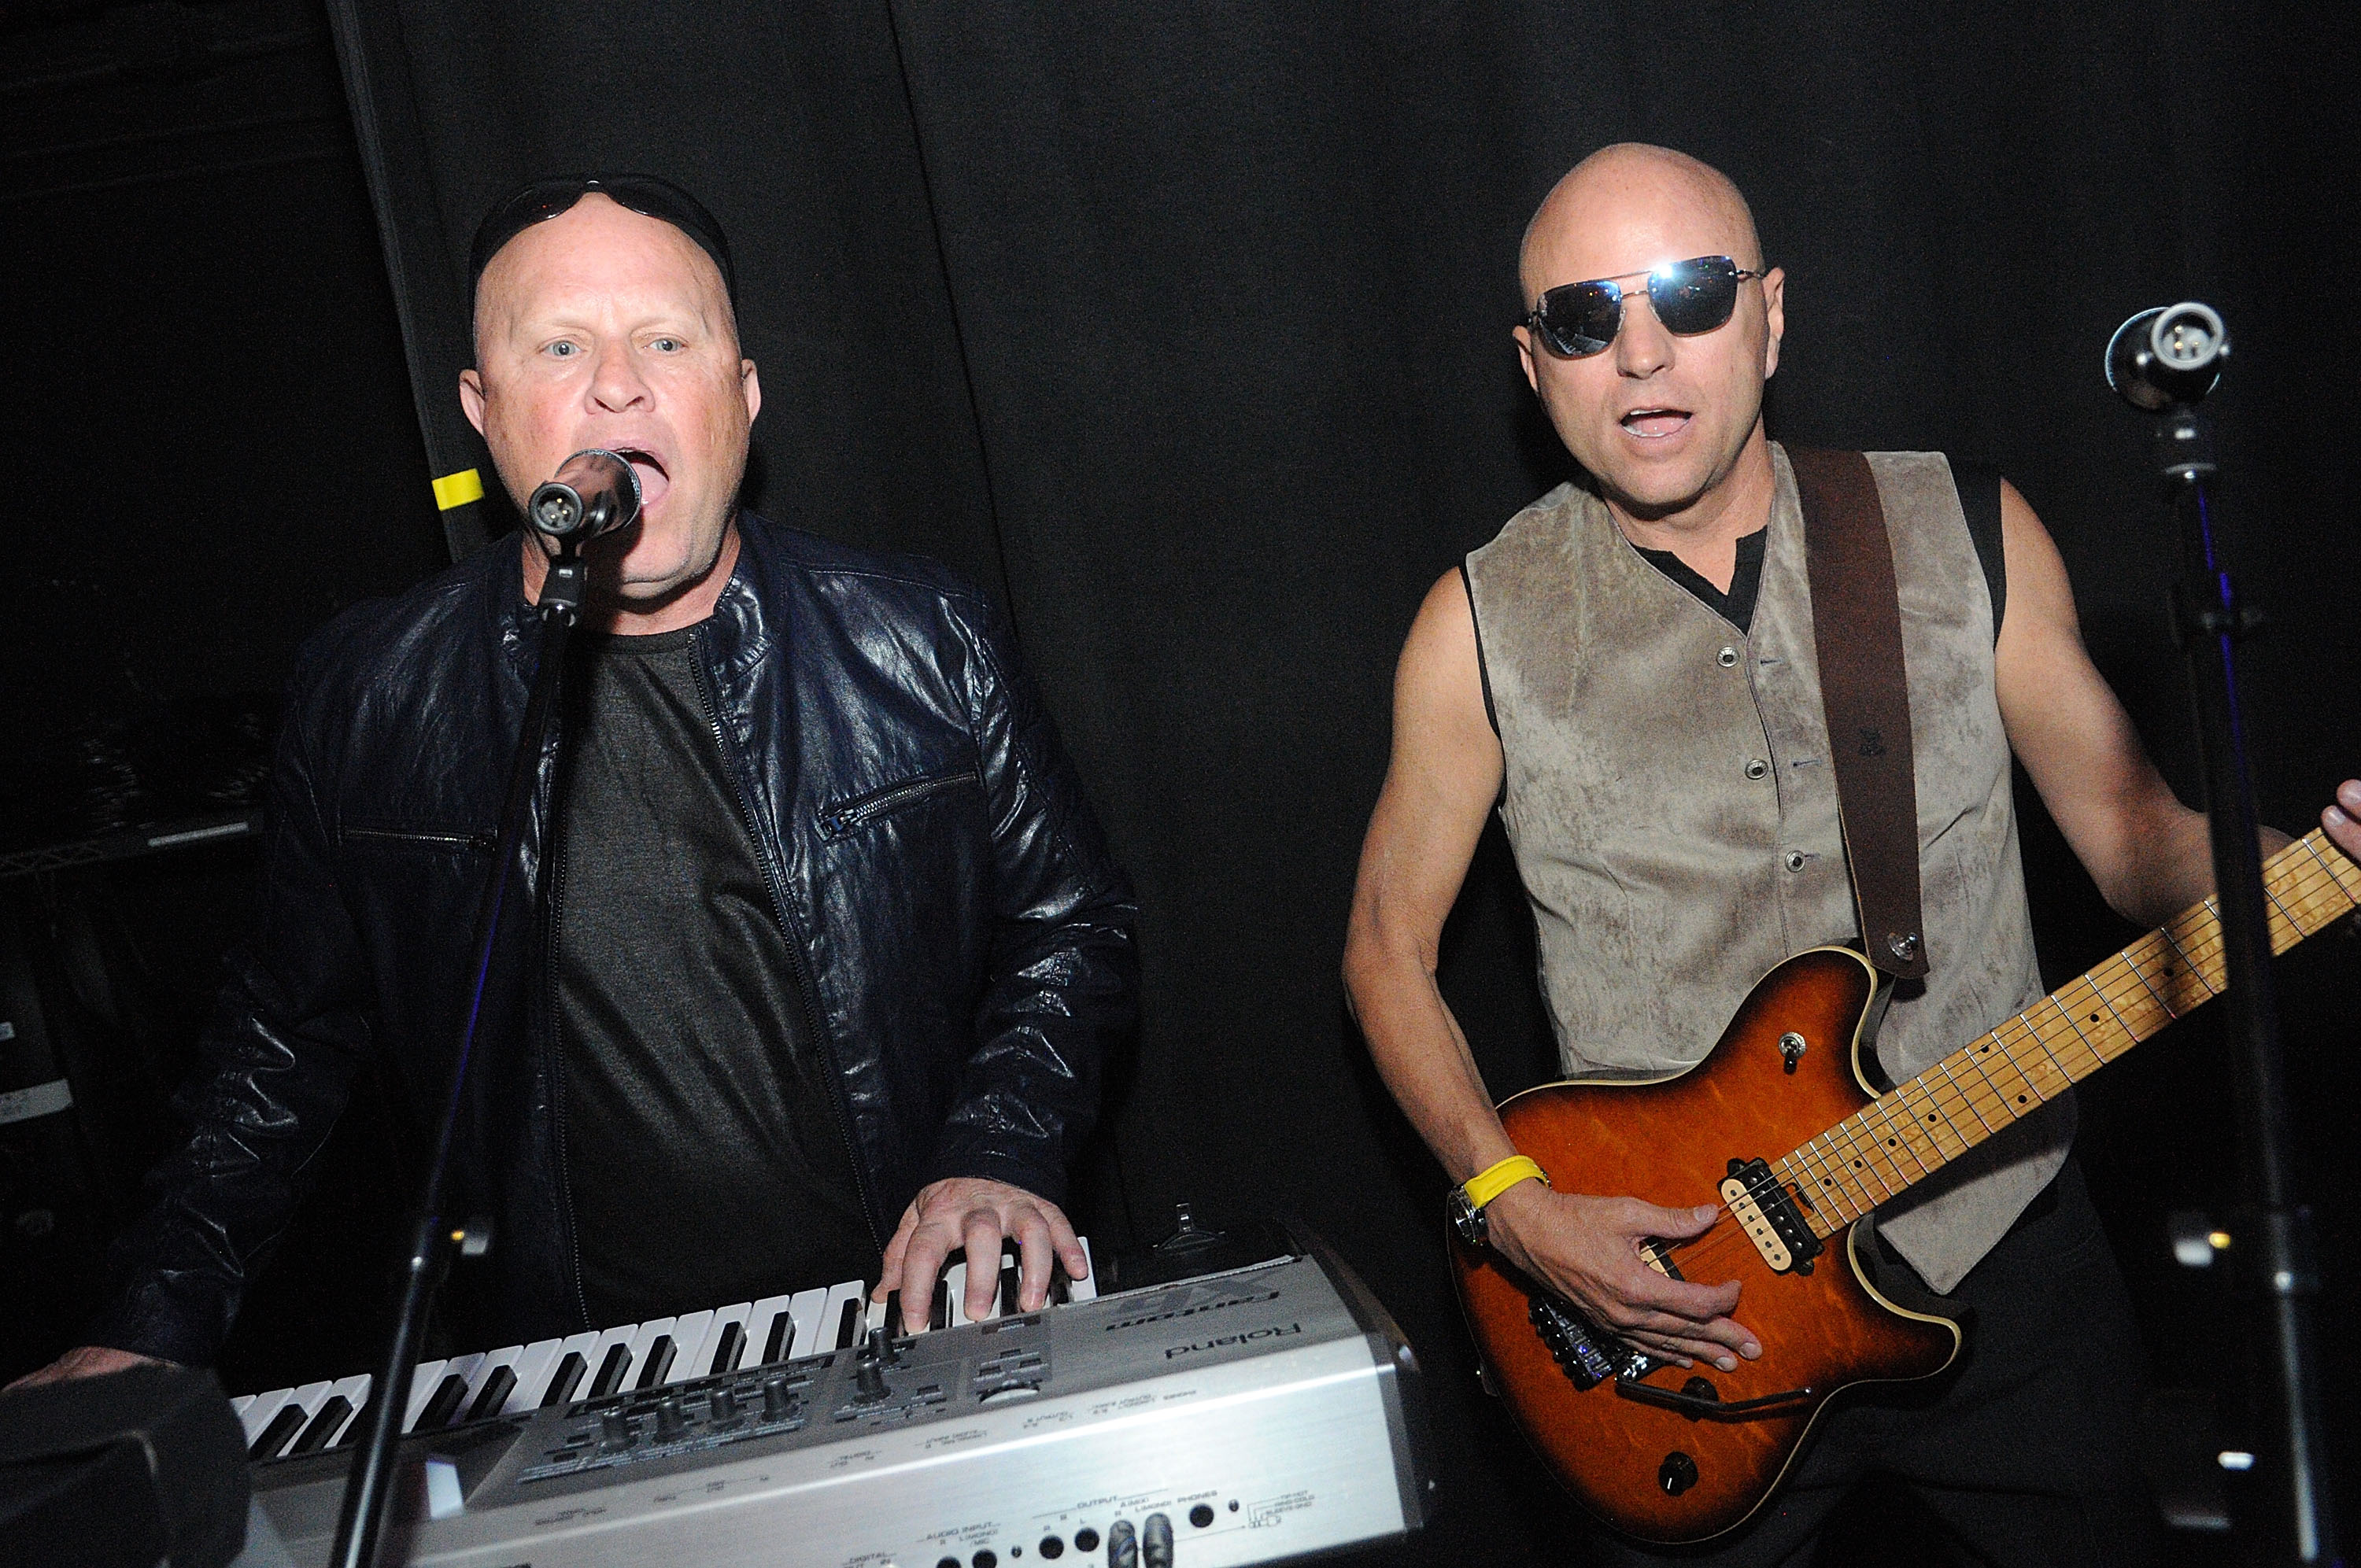 Jimmy D Robinson & Flock of Seagulls at H.O.B. - L to R: Mike Score and Jimmy D Robinson. (Photo by Gerardo Mora/Getty Images)